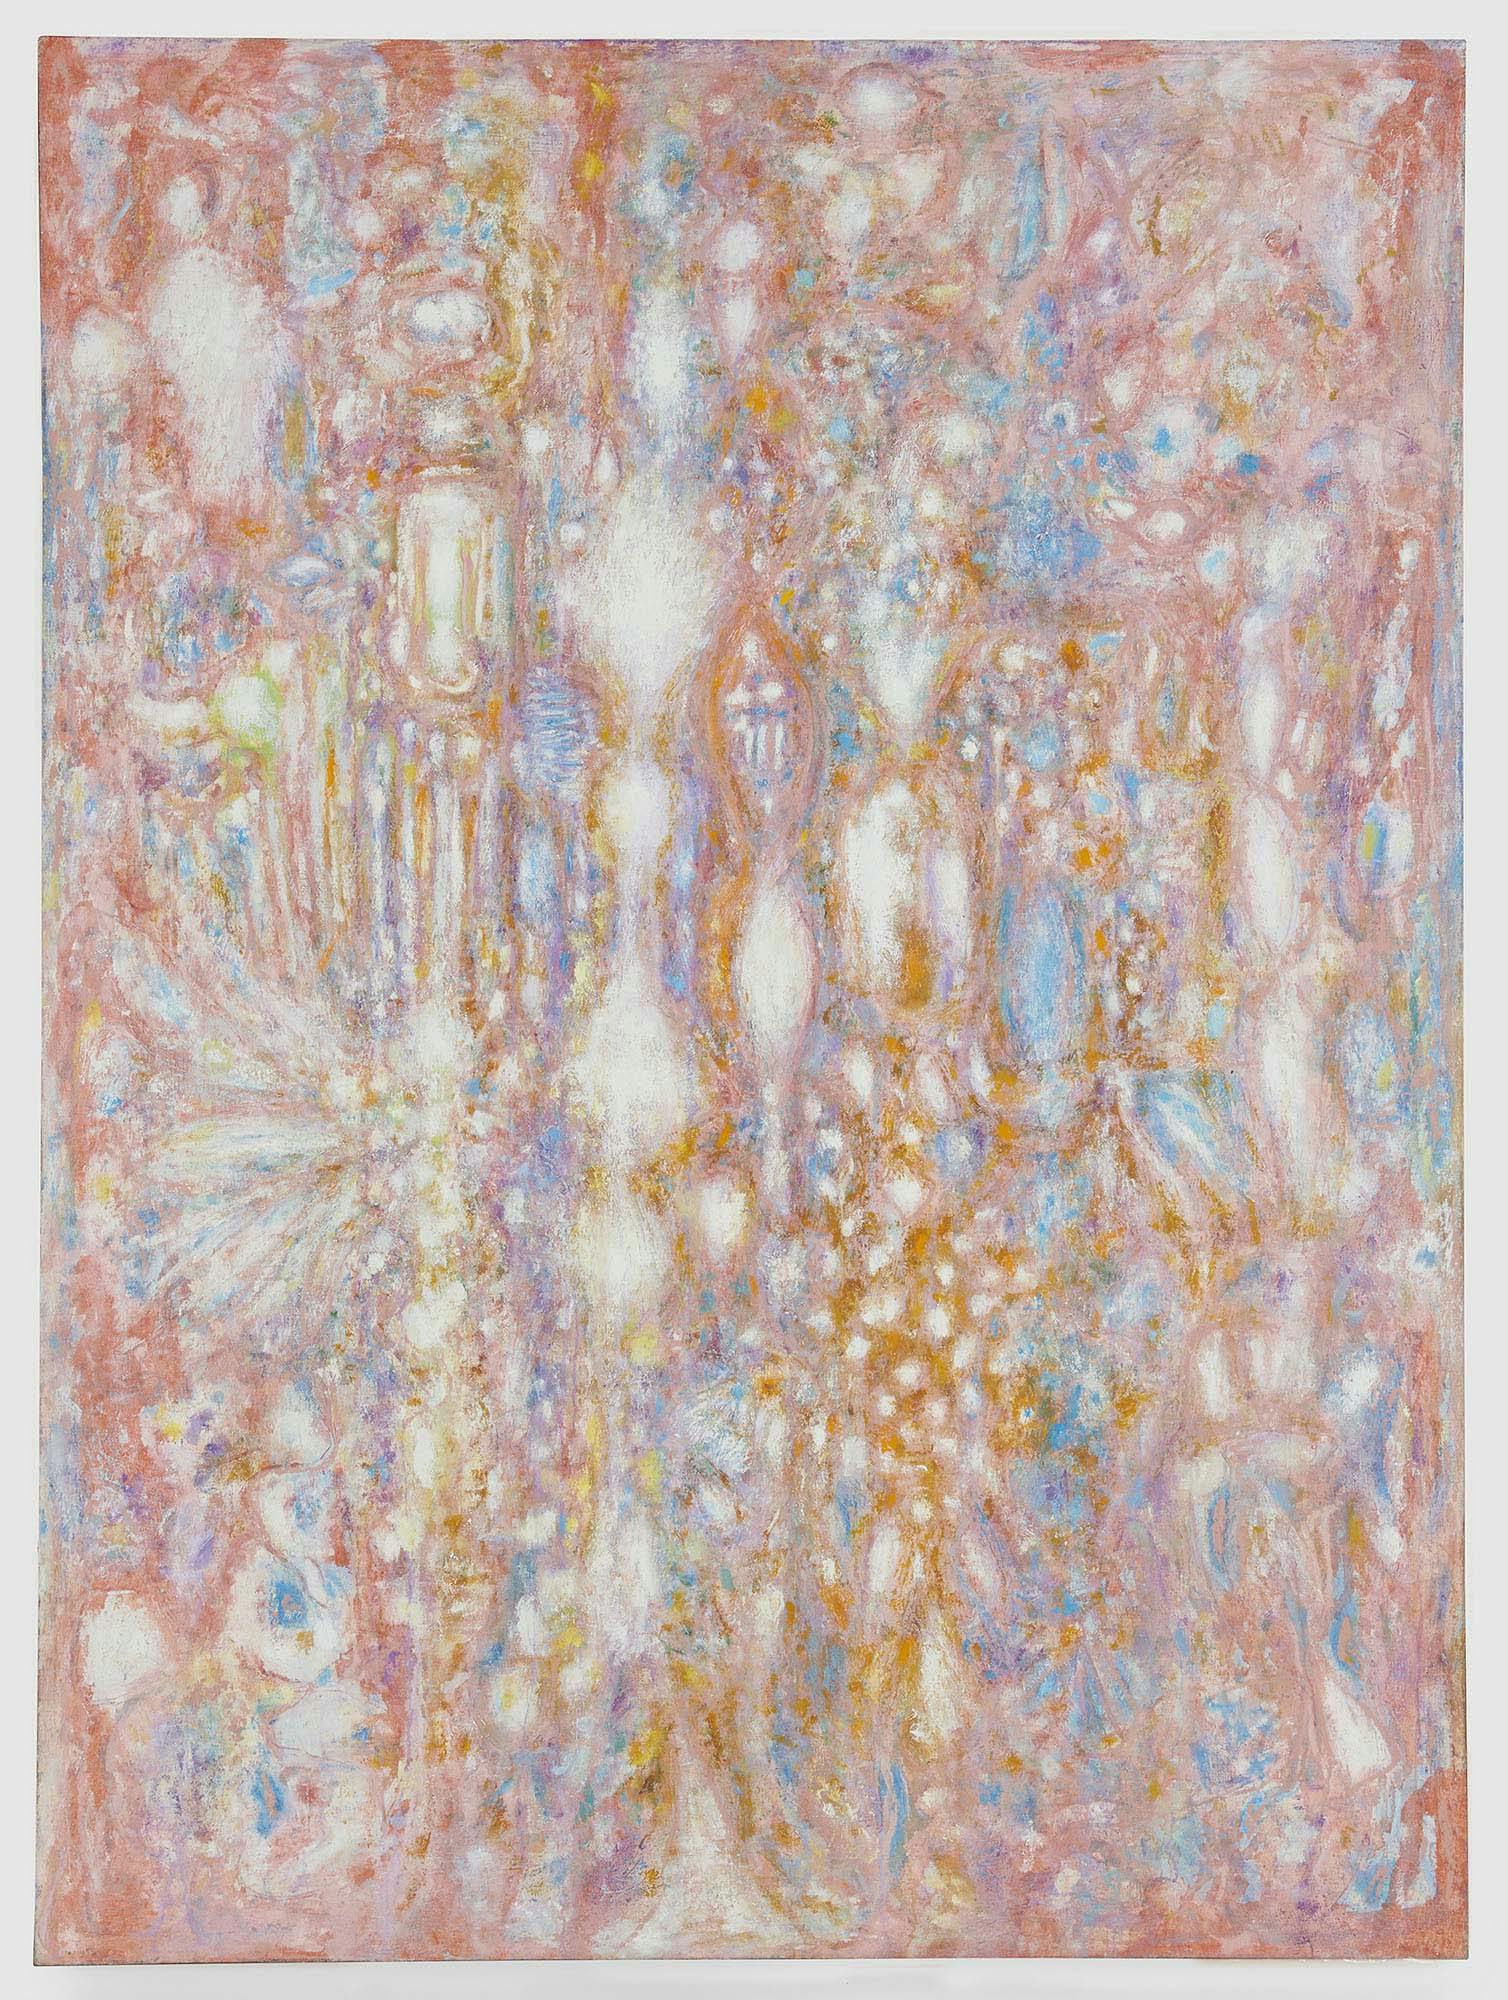 The Fountain
1960
Oil on canvas
75 1/2 x 56 in. (191.8 x 142.2 cm)
 – The Richard Pousette-Dart Foundation